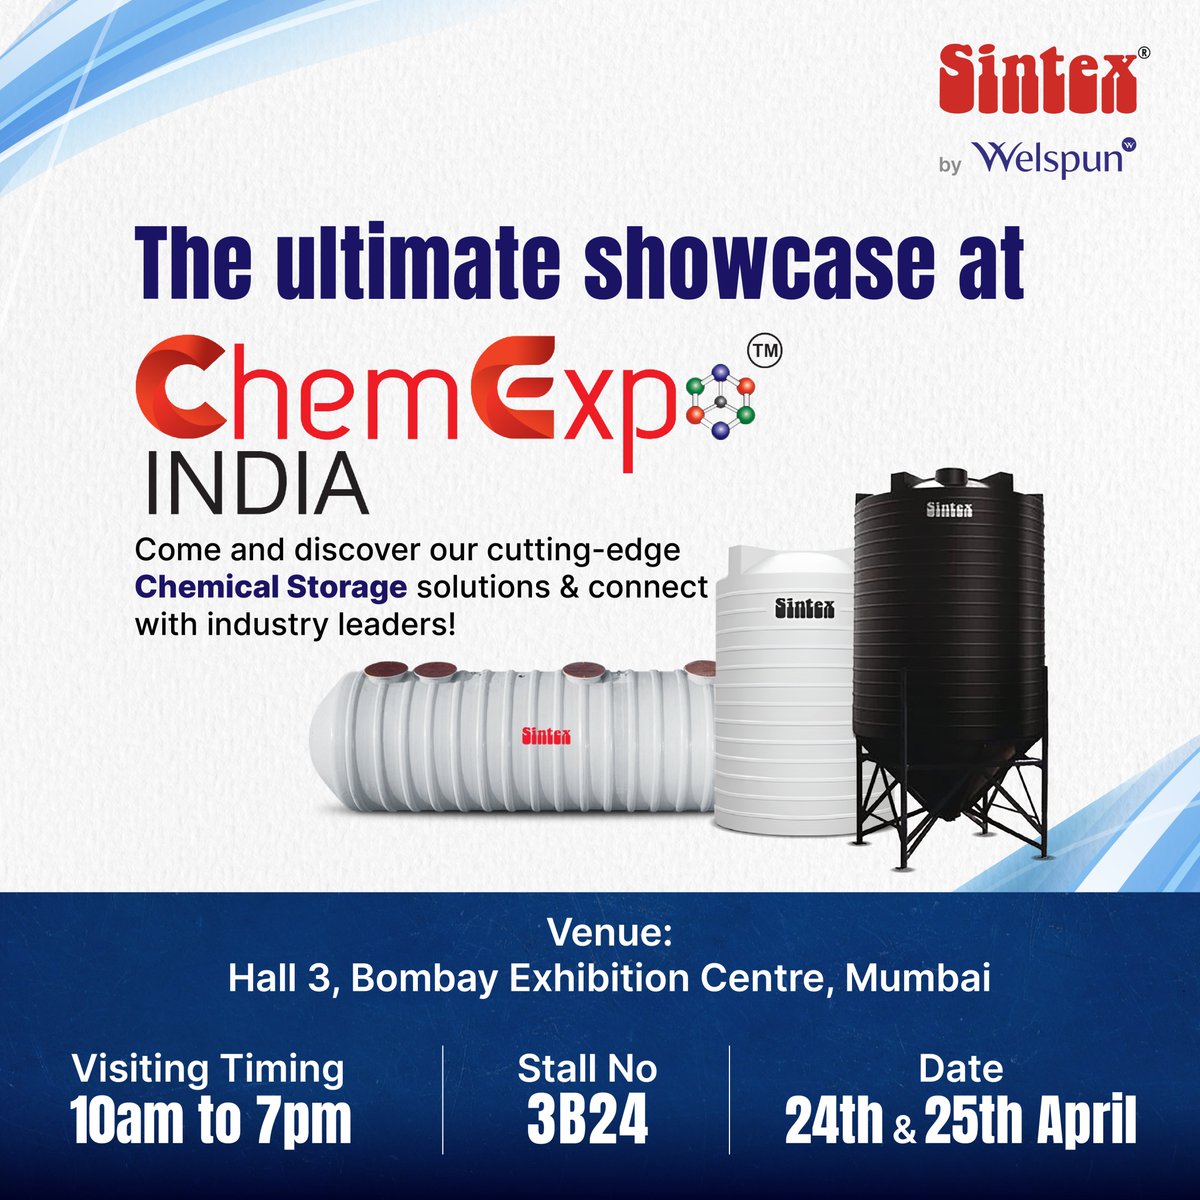 Sintex is thrilled to be a part of the #ChemExpo!✨ We look forward to showcasing our cutting-edge products & engaging with fellow participants. 🤝 See you there! #Sintex